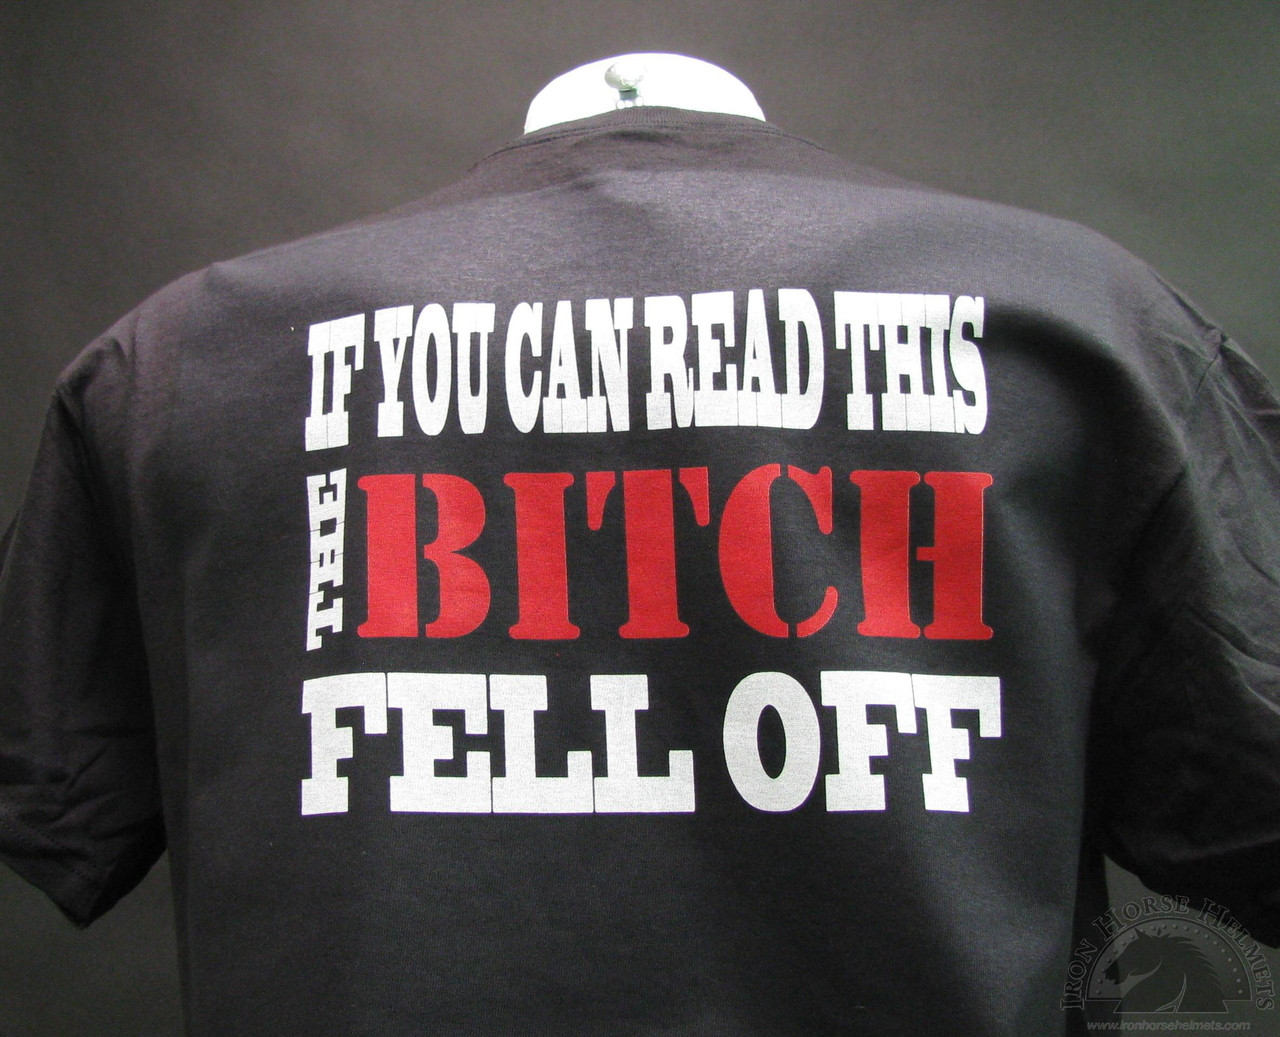 If You Can Read This The Bitch Fell Off T-Shirt - A humorous nod to the  motorcycle riding experience!